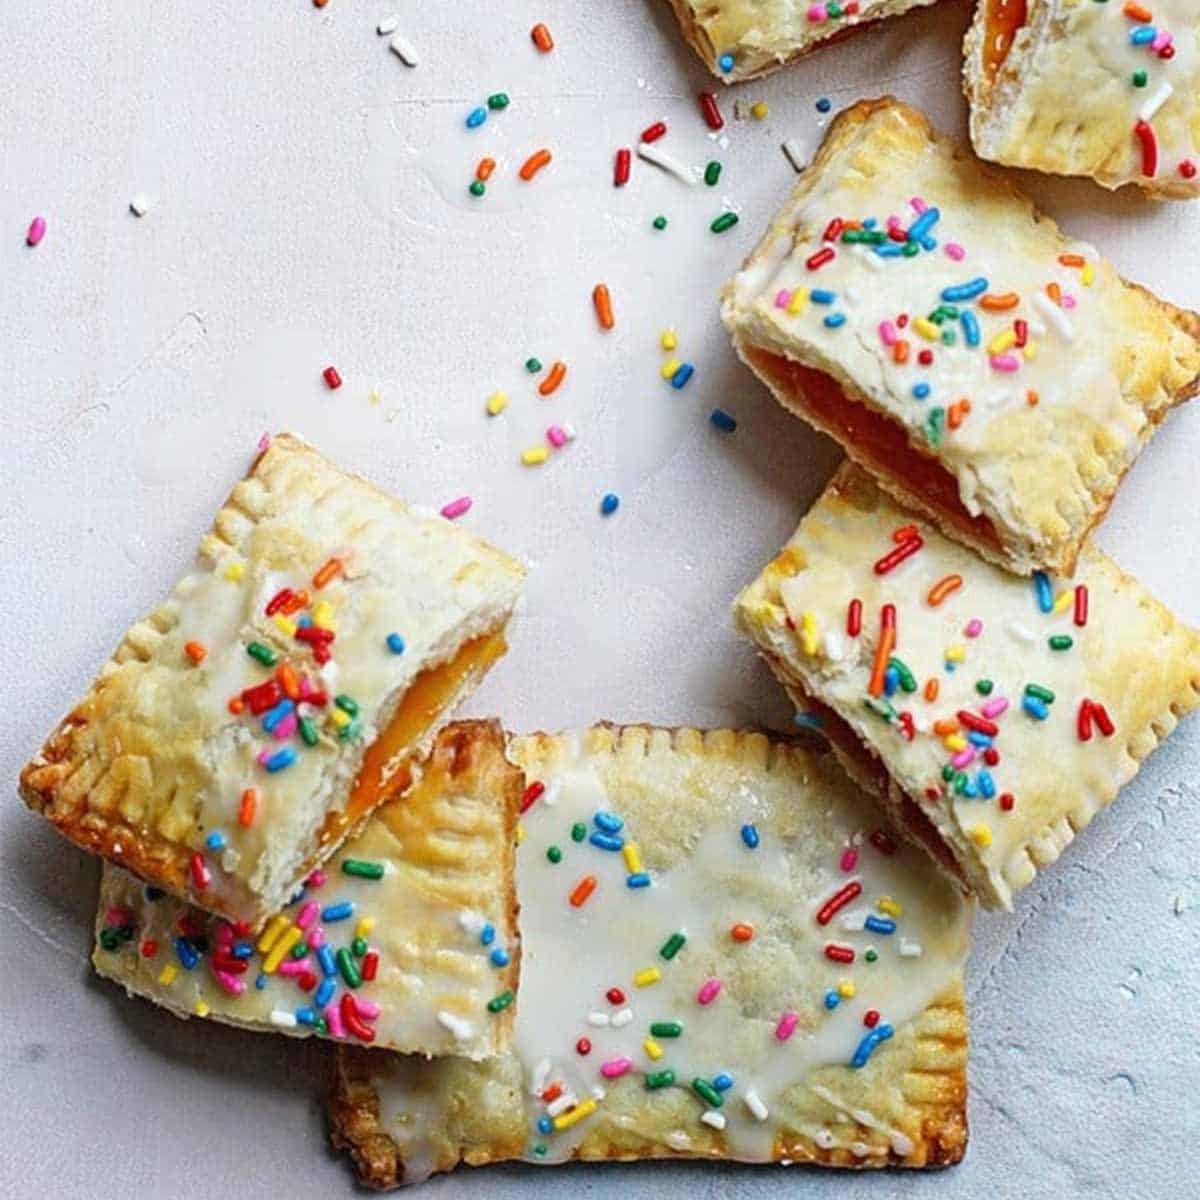 Homemade Pop Tarts piled on top of each other and cut in half so you can see the filling inside.